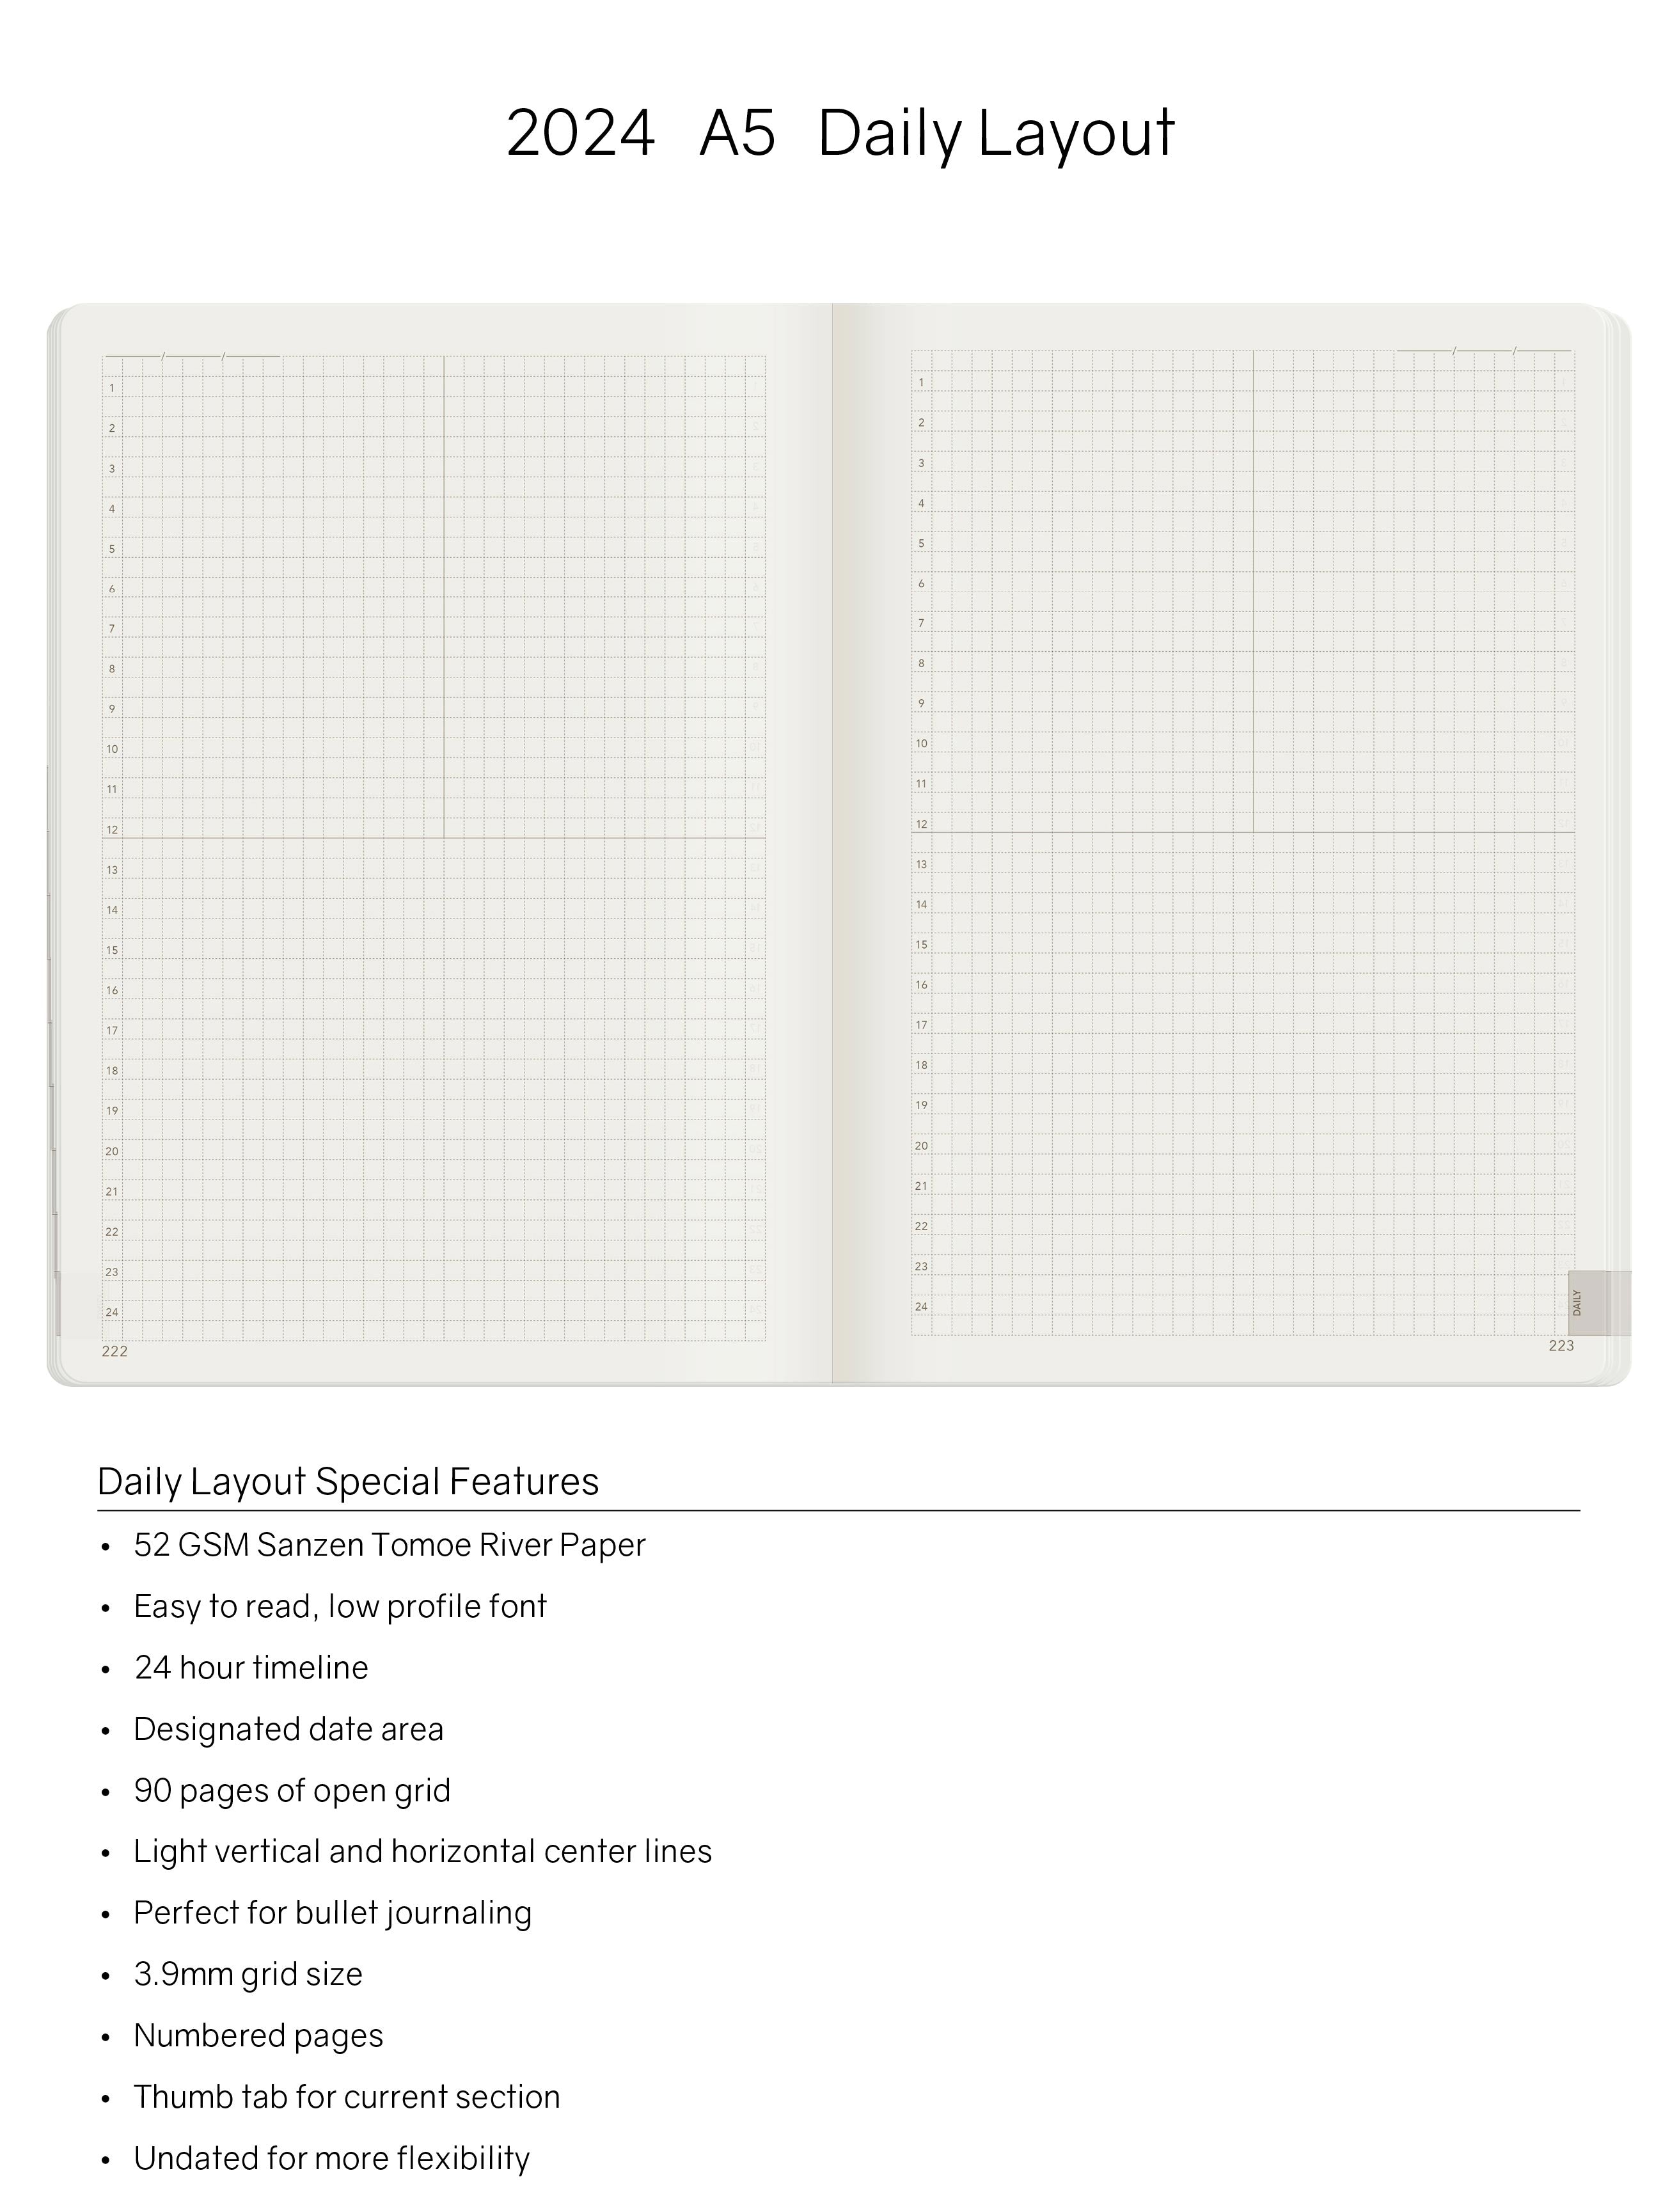 2024 A5 Weekly Planner (Stacked Weekends) -Alpine Lake (Blue) 52gsm Tomoe River Paper